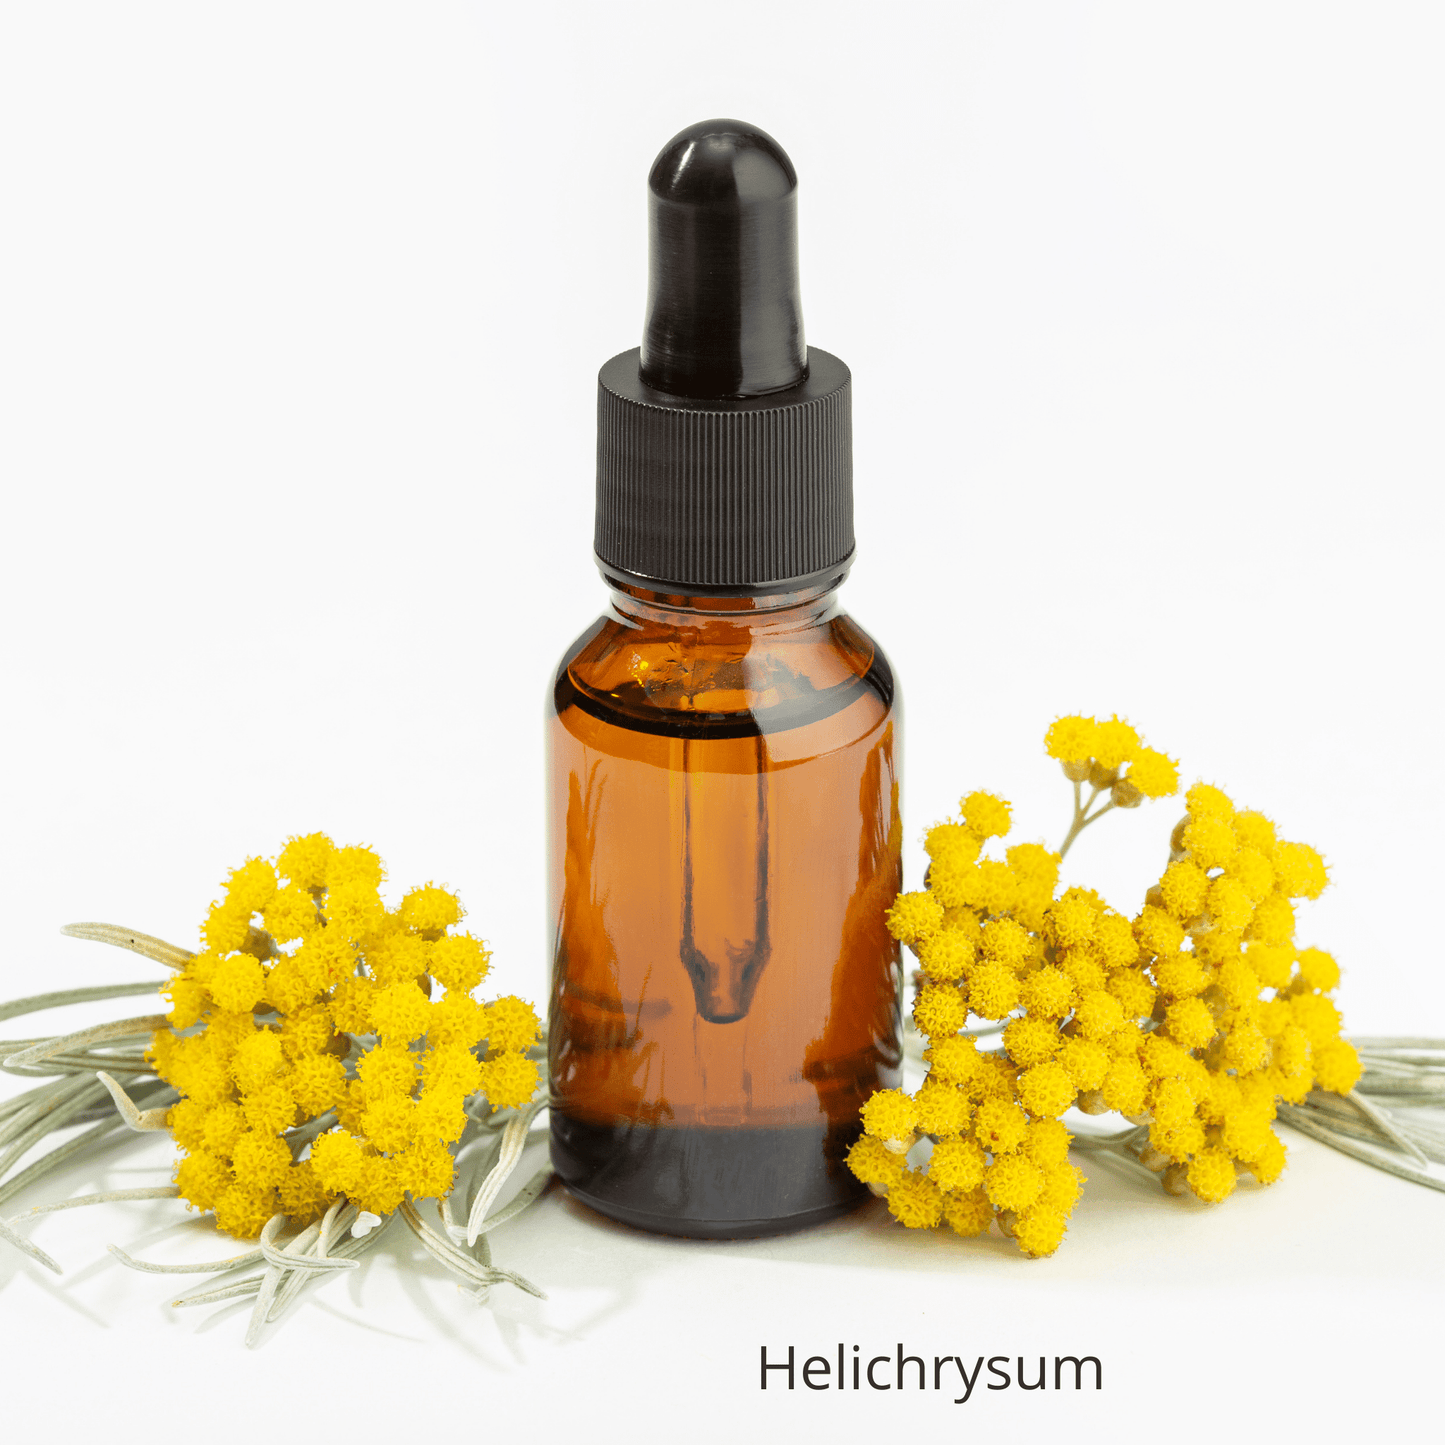 Be Green Bath and Body Rosehip Regenerative Serum contains helichrysum oil